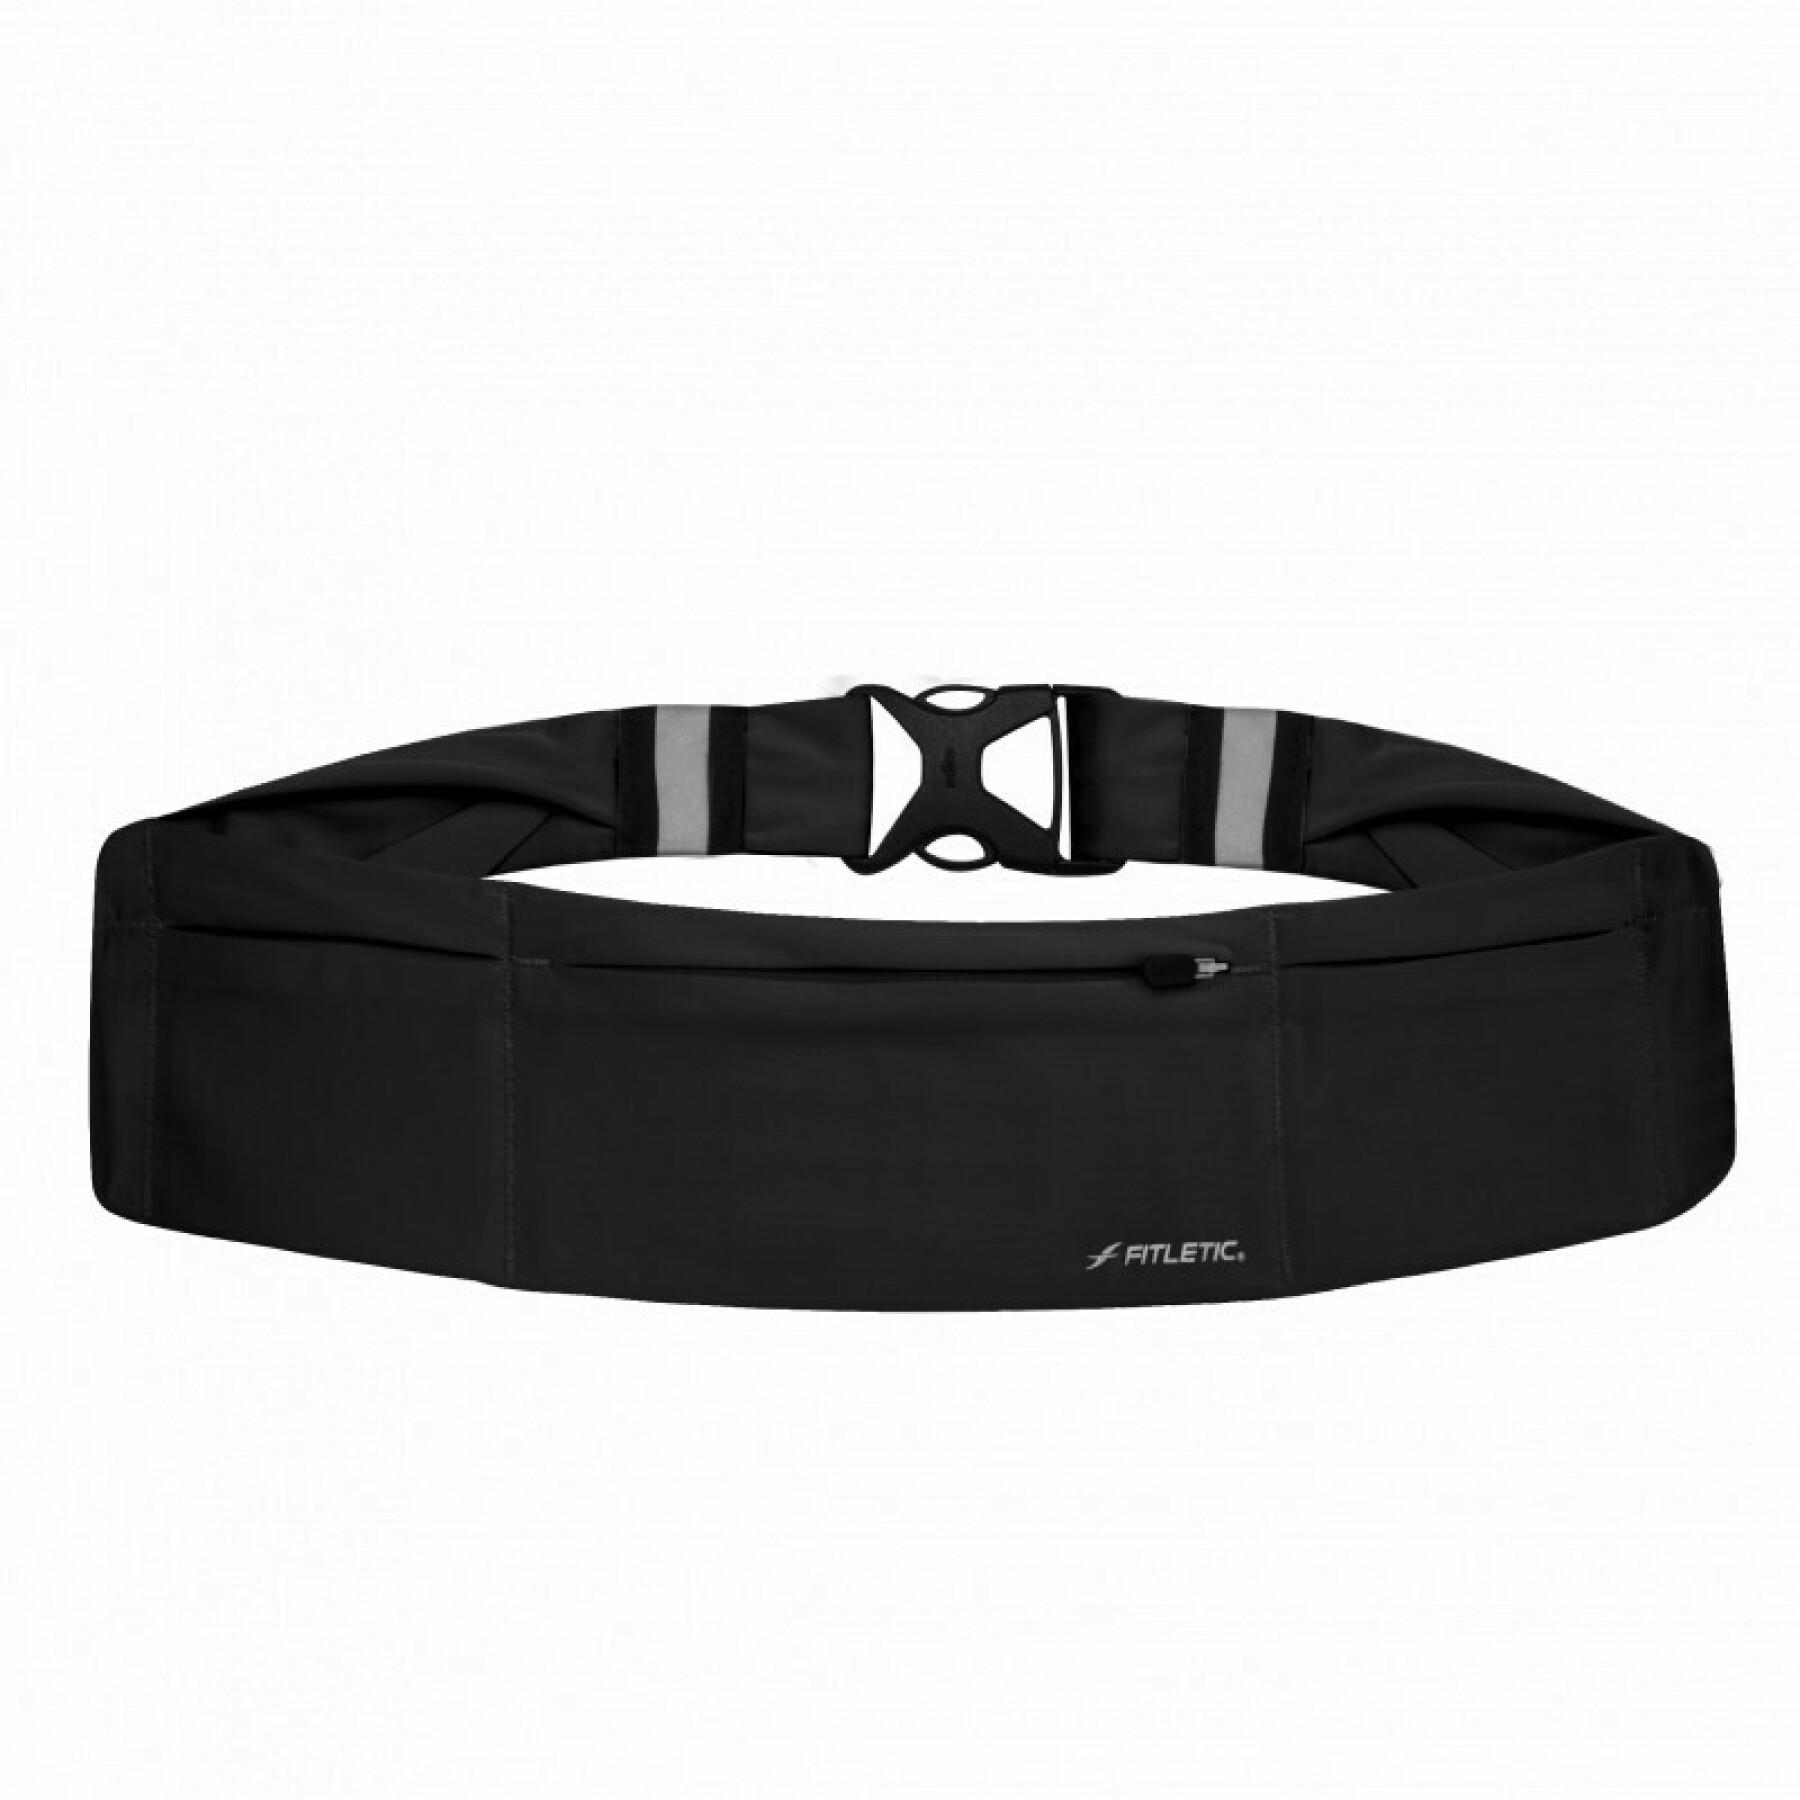 360° belt with 3 waterproof pockets Fitletic